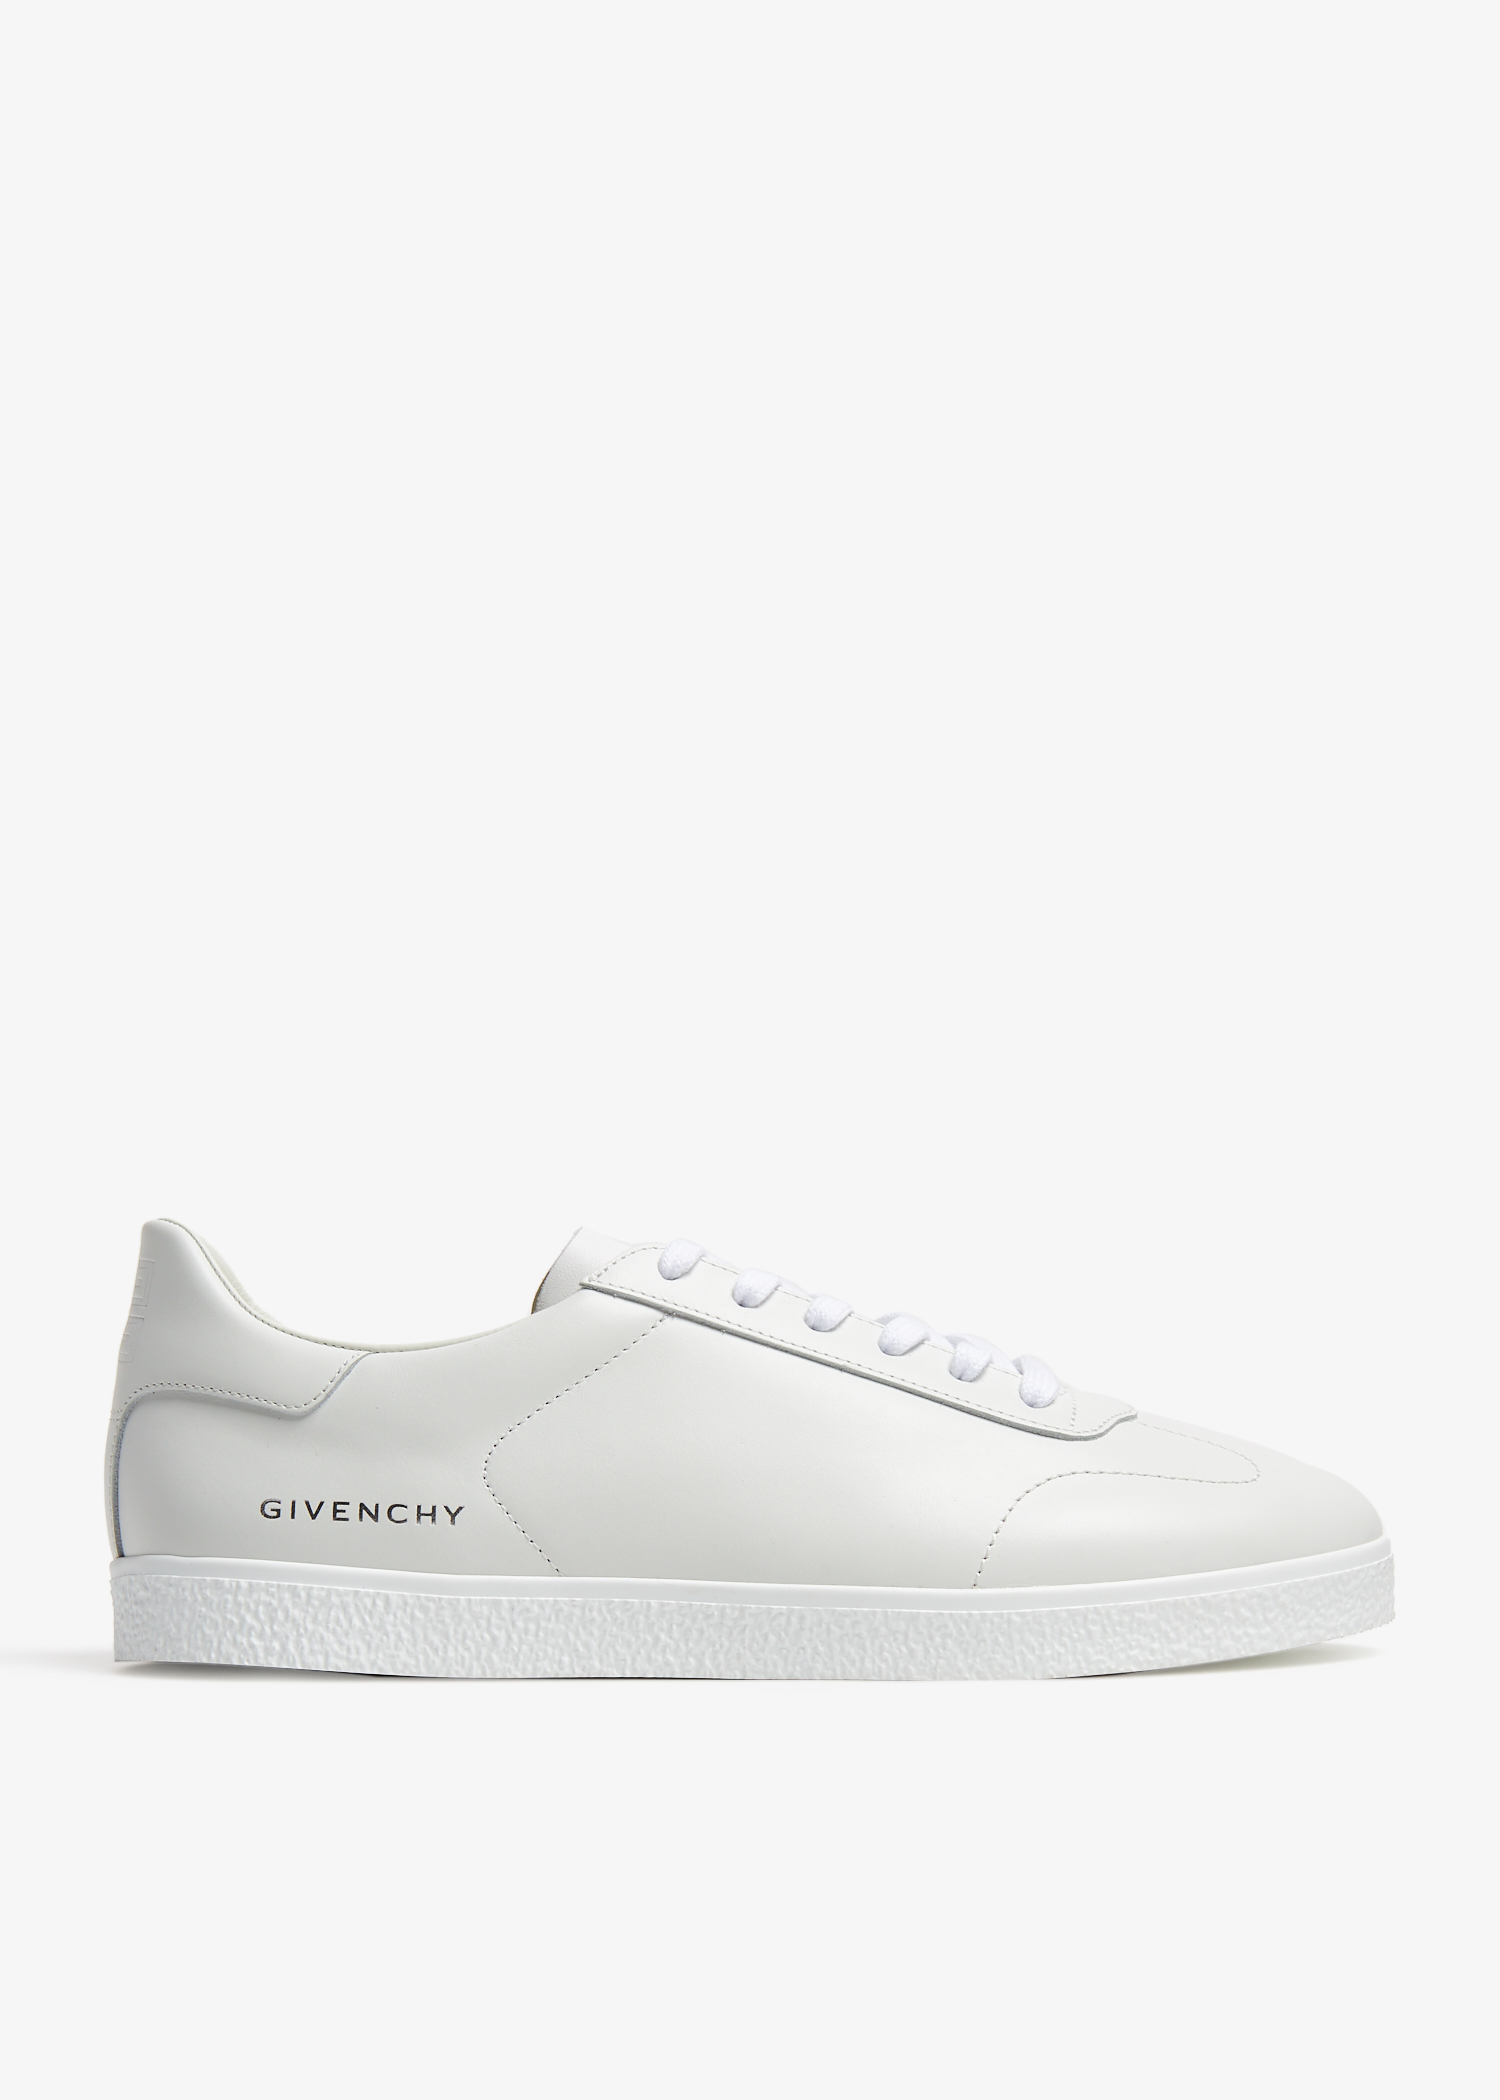 GIVENCHY Sneakers Giv 1 | Sneakers | Sneakers & Casual Shoes | Shoes | MEN  | Sale | mientus Online Store